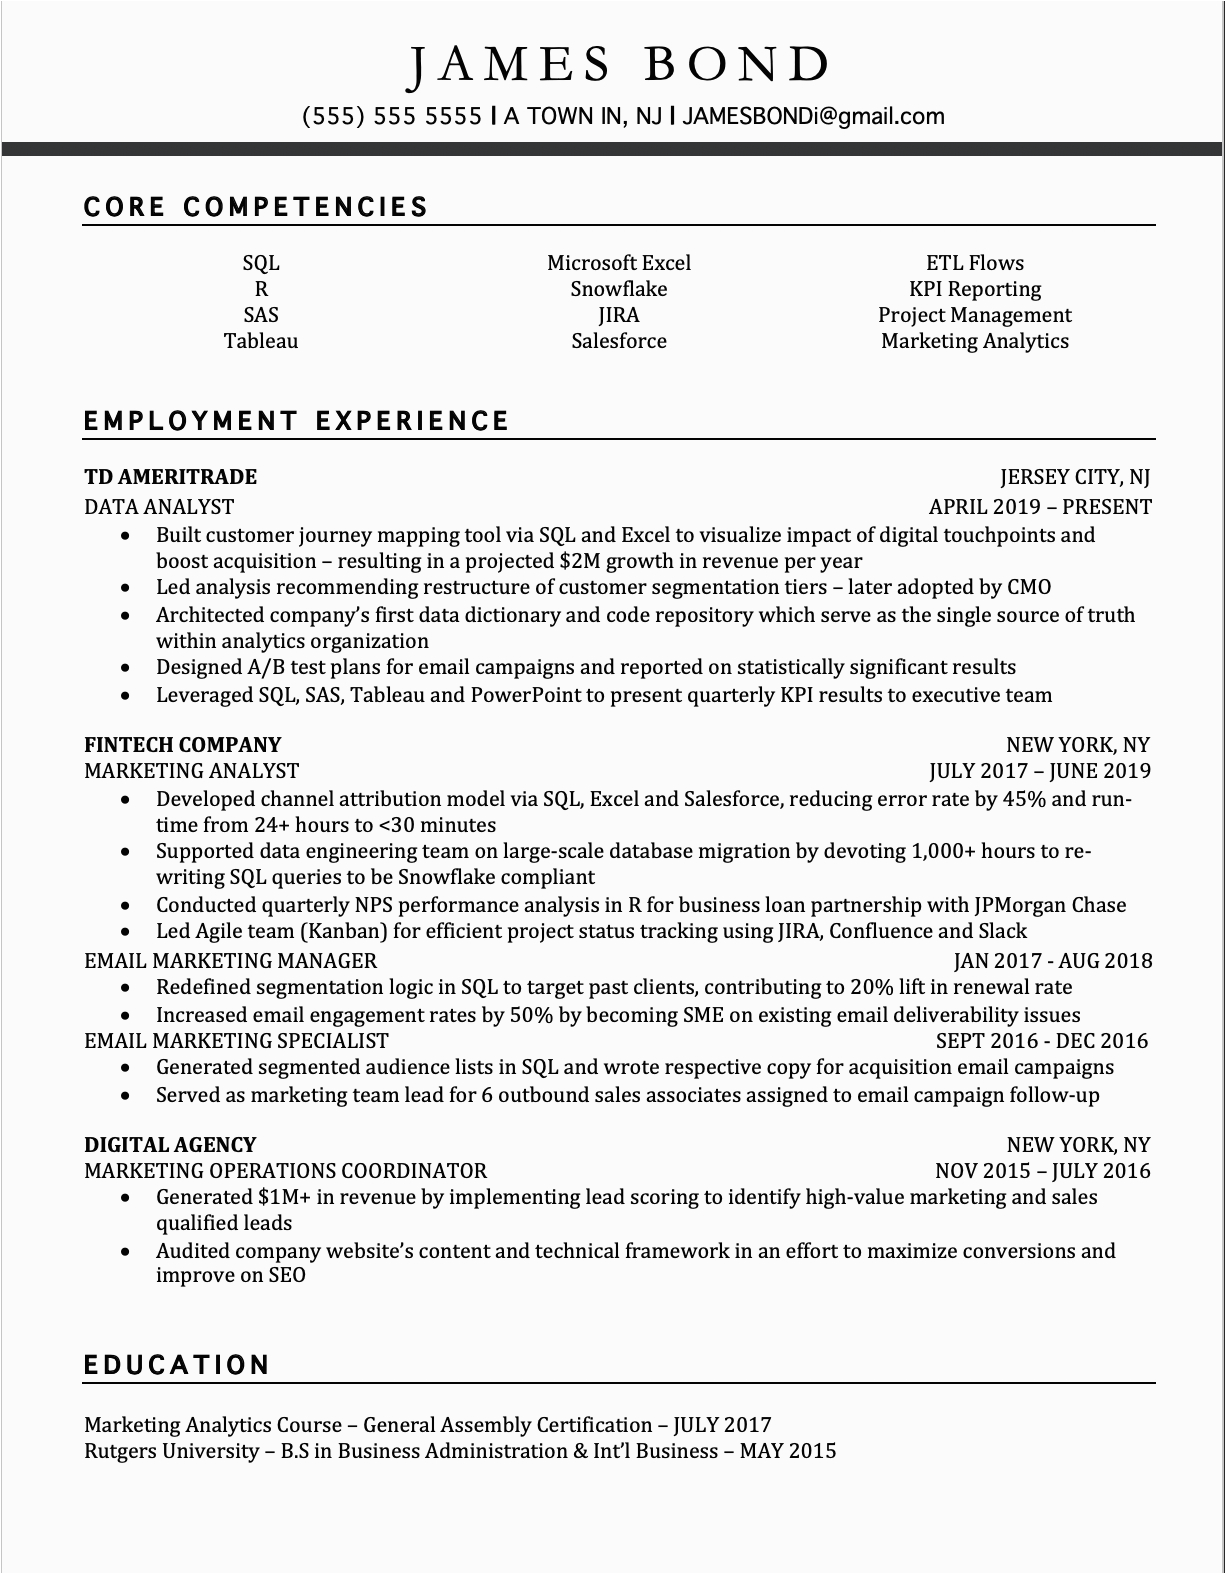 Sample Resume with Multiple Positions at Same Company Resume format Multiple Positions In Same Pany